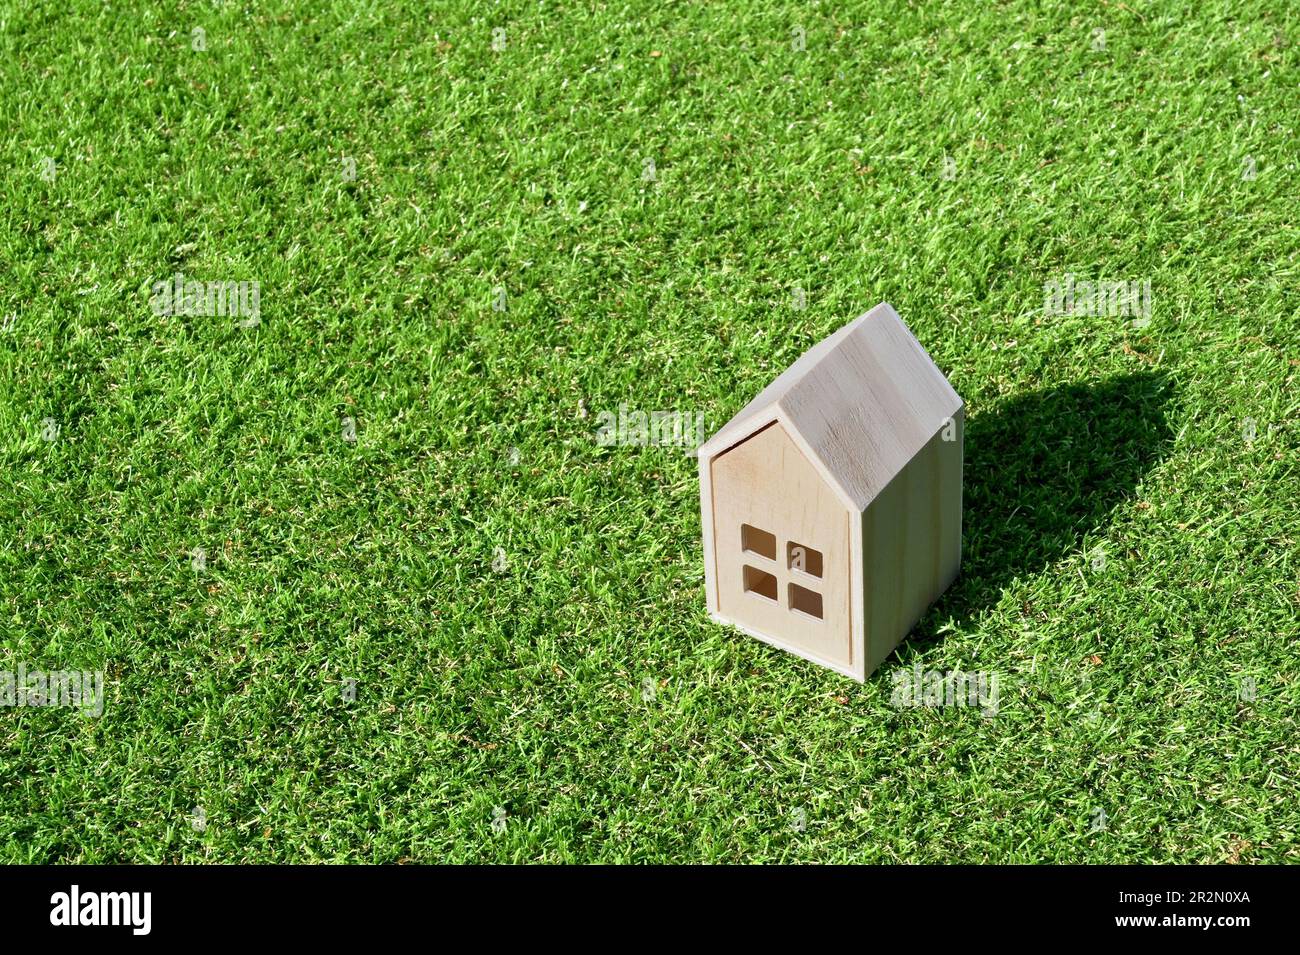 Small wooden model house on a background of short green grass. Housing concept. No people. Copy space. Stock Photo